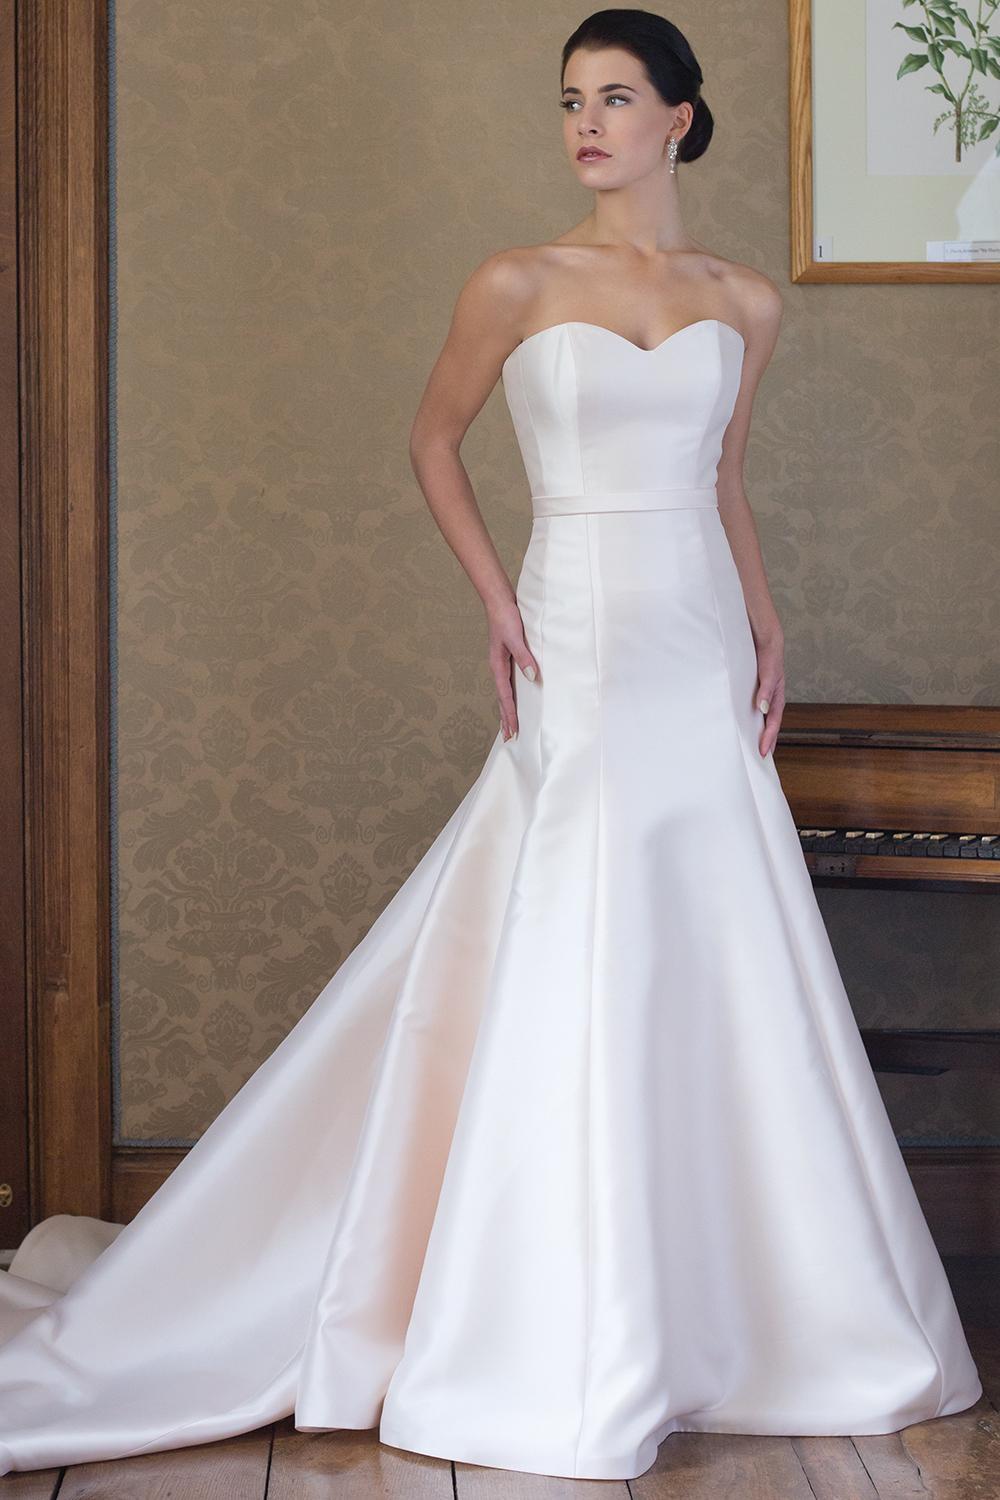 Simple Satin Sweetheart Neck Fit And Flare Wedding Dress ...